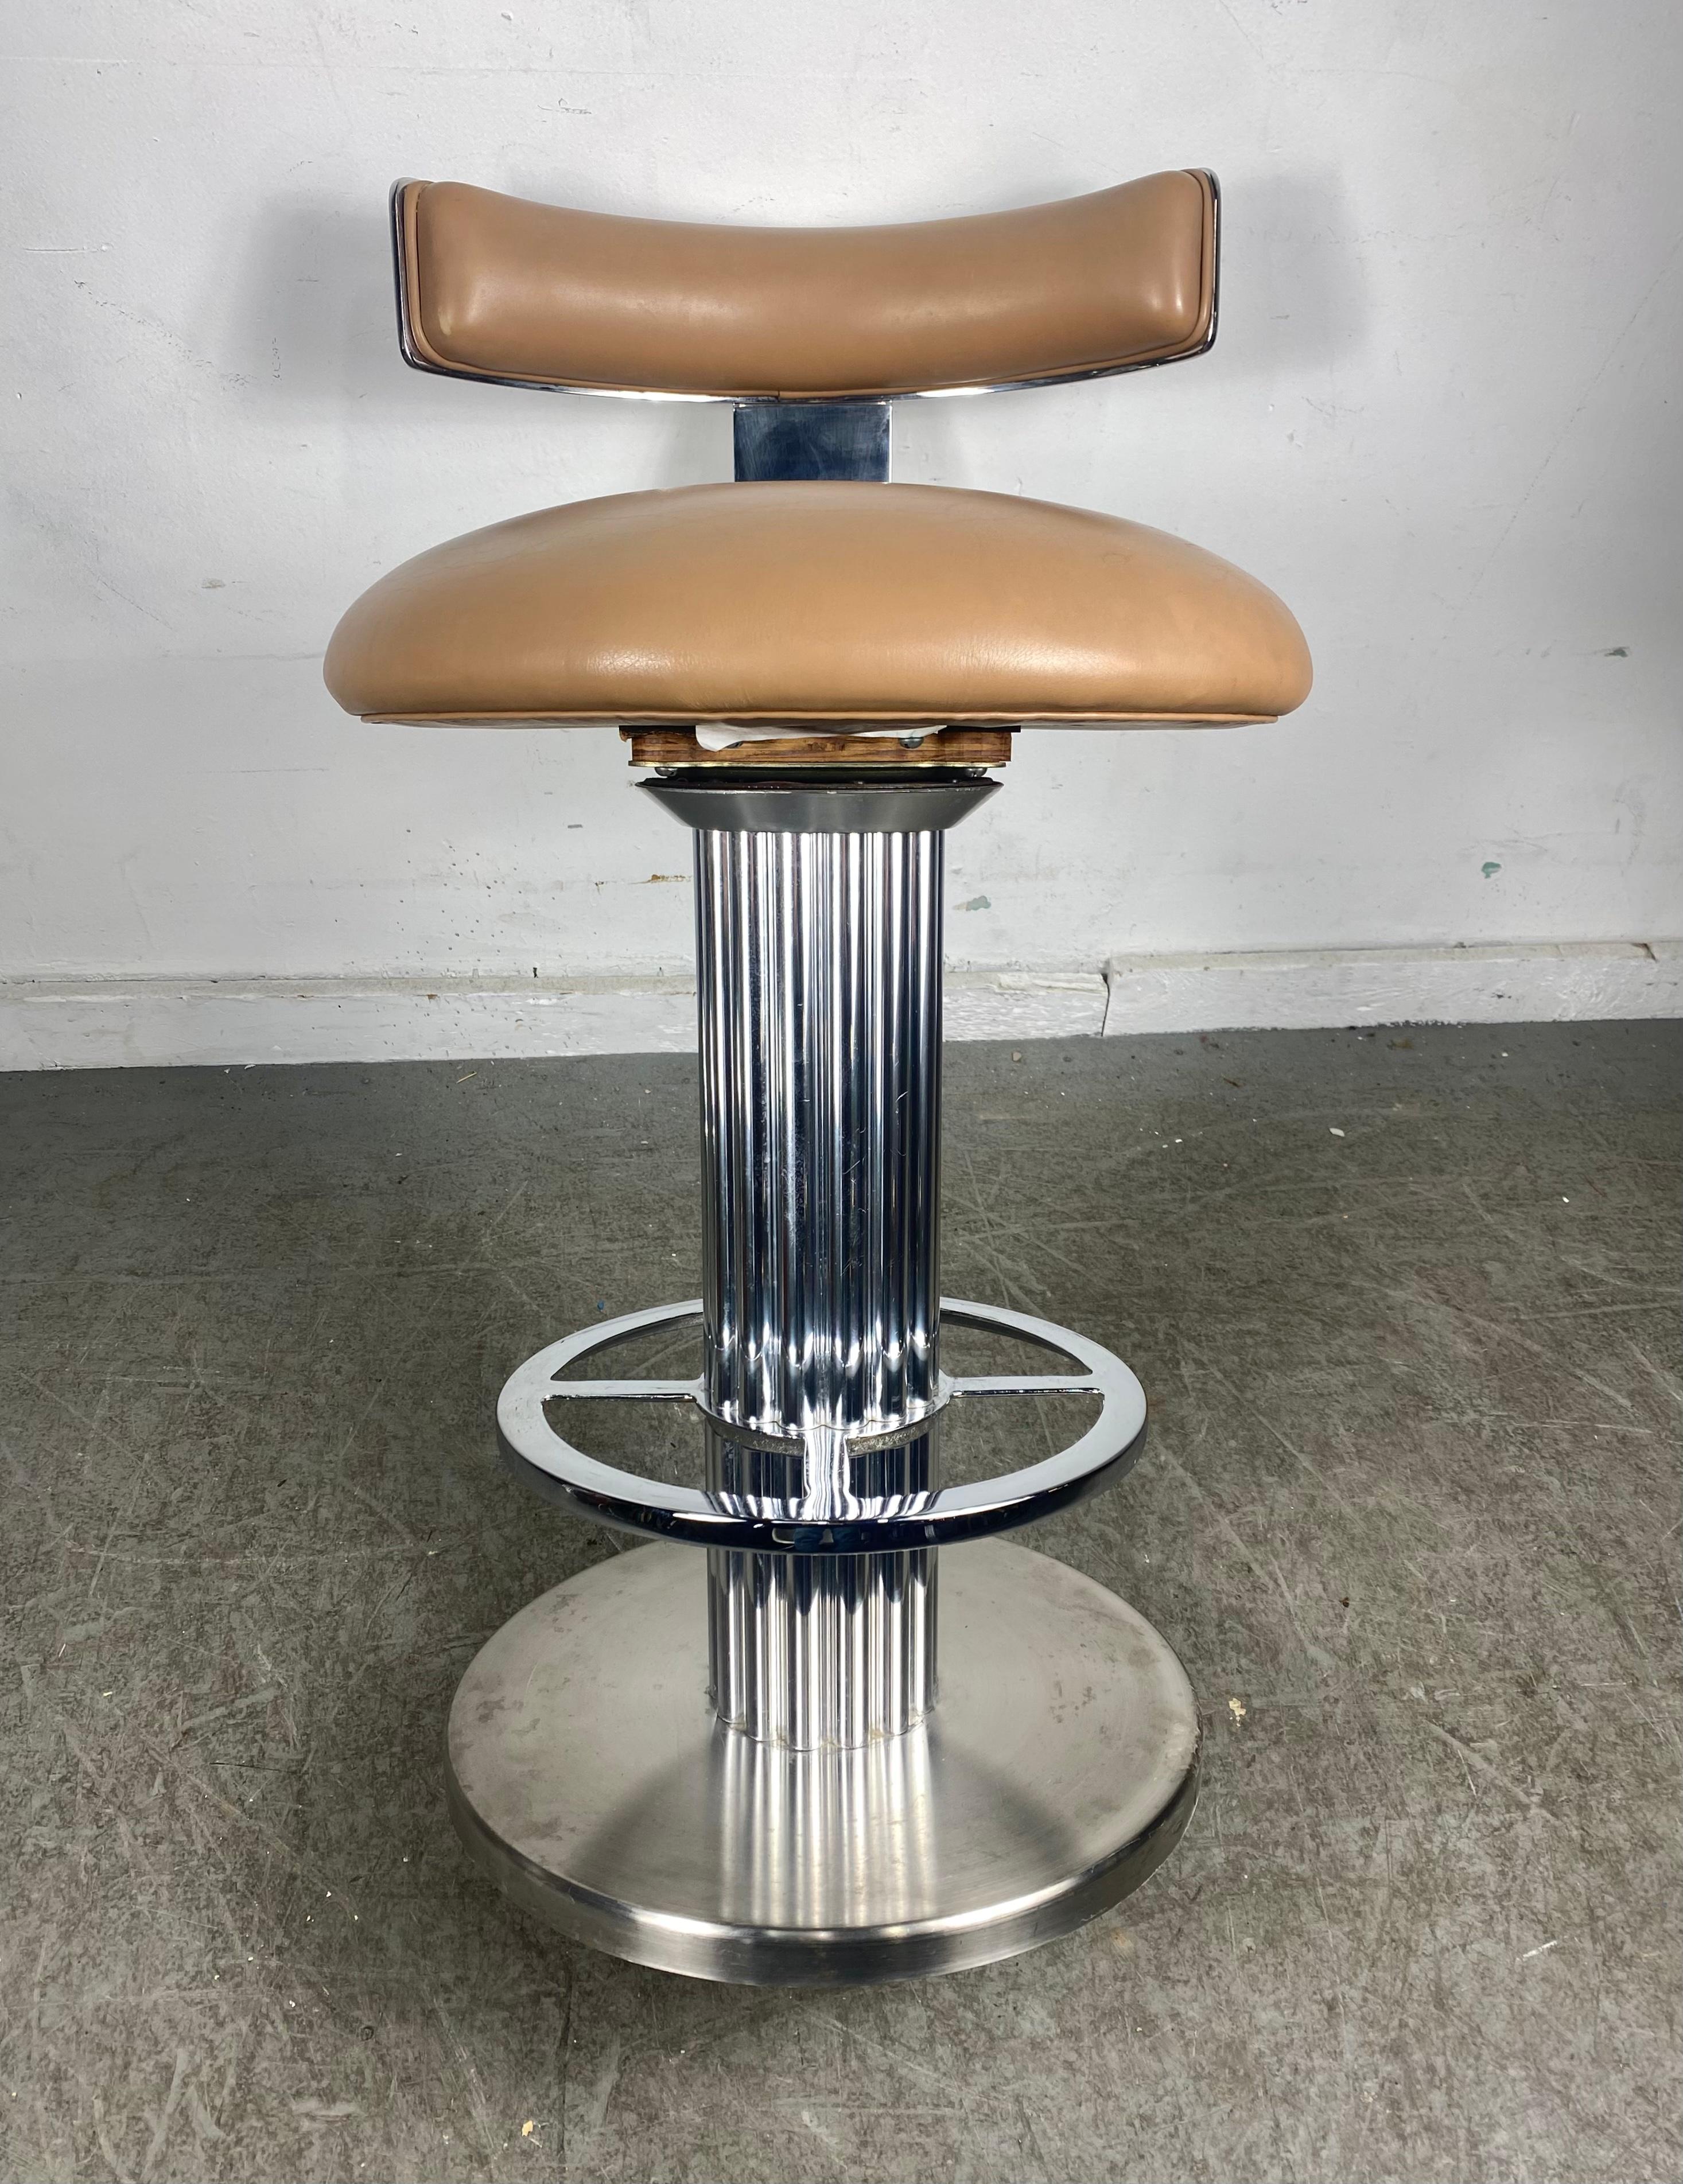 Brushed Design for Leisure Swivel Barstools, Art Deco Revival, Nickel, Stainless, 4 Avail.